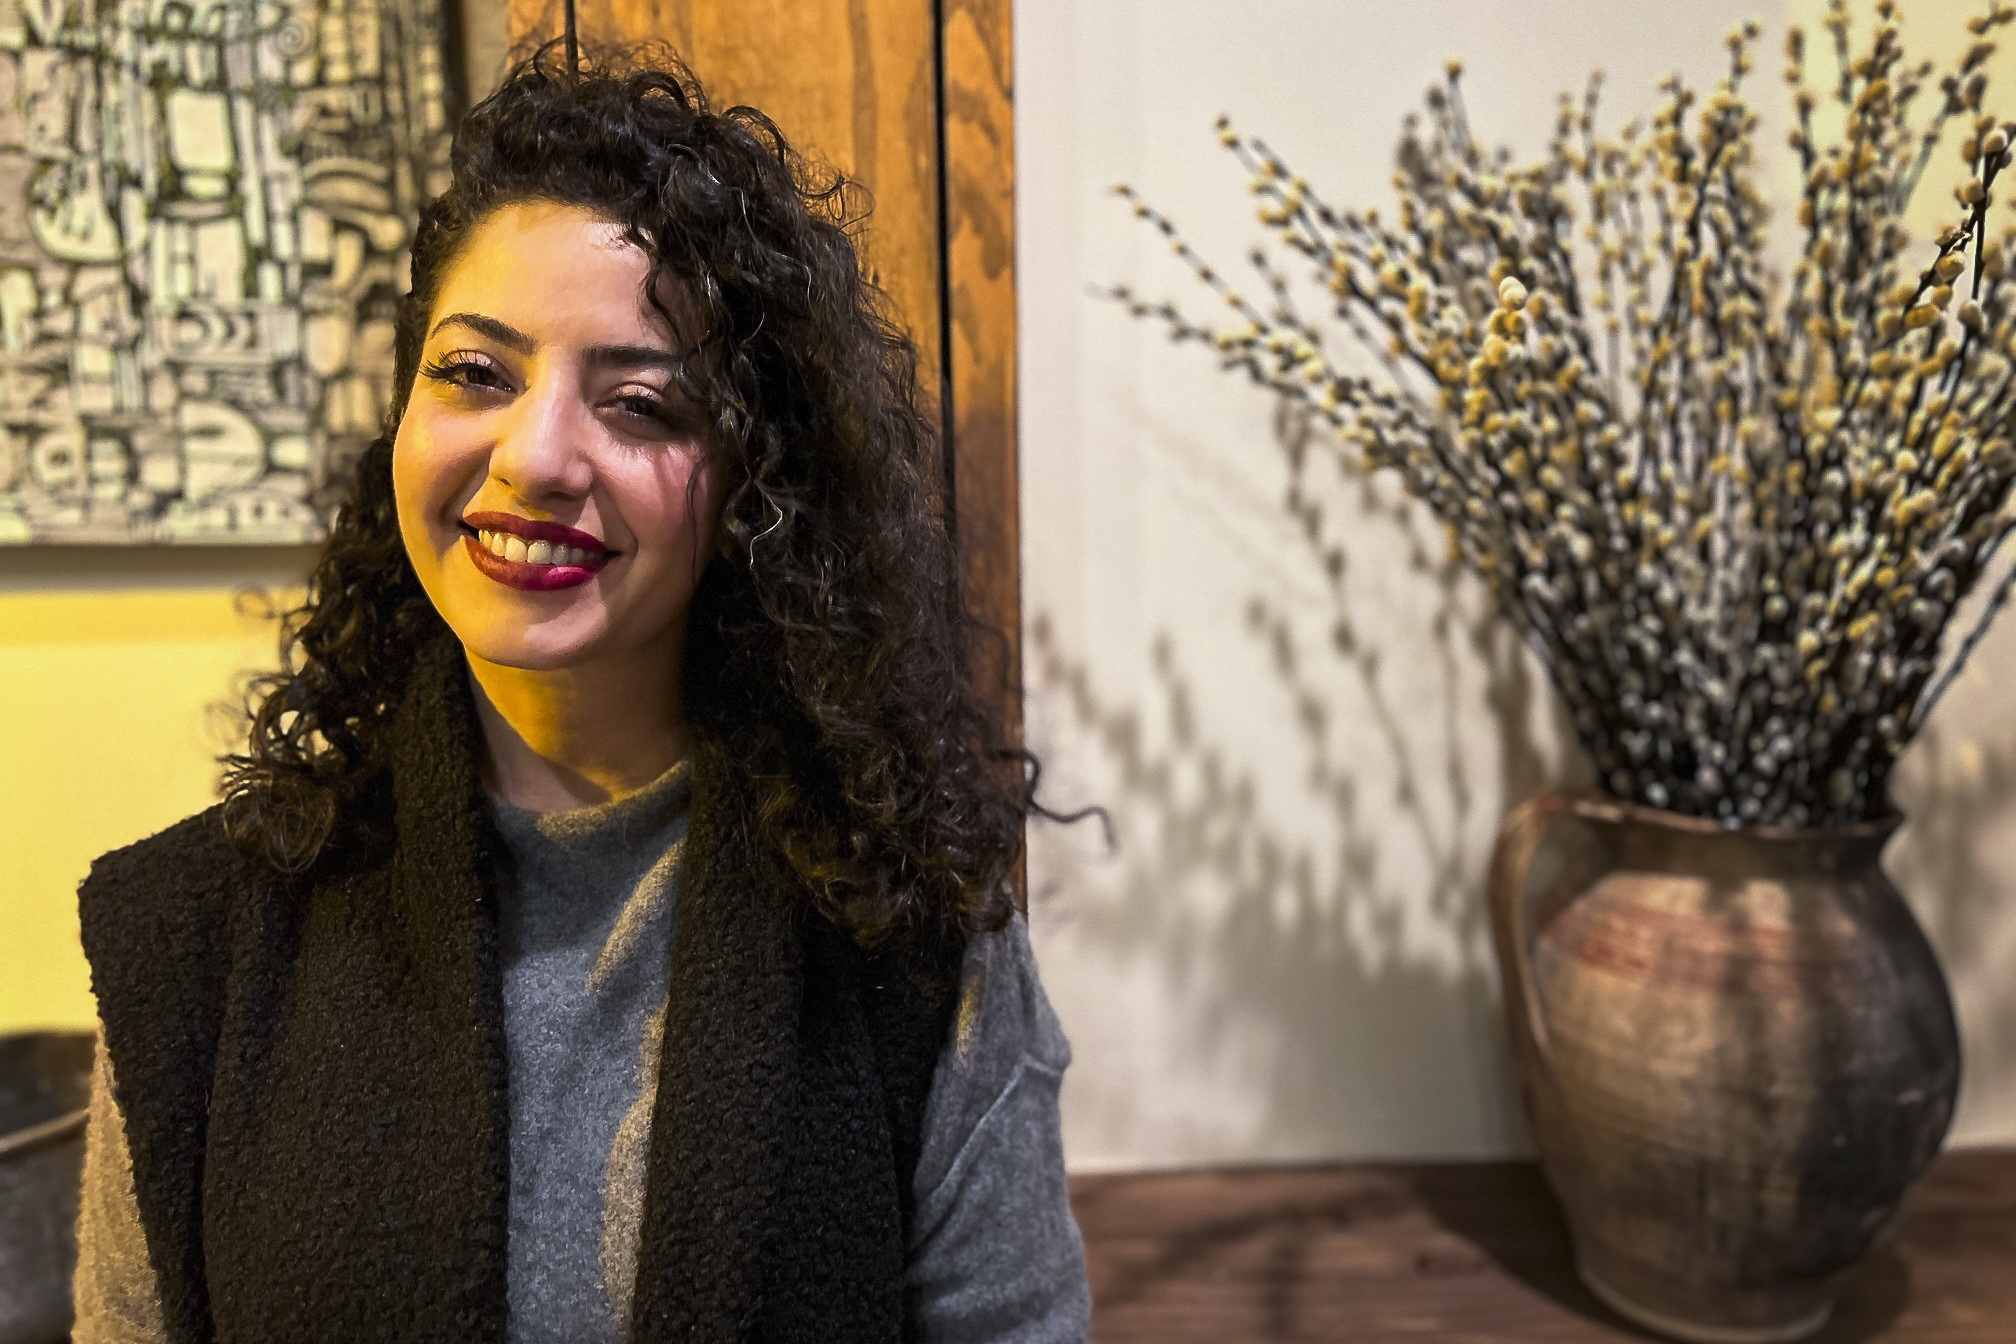 A smiling woman with curly hair stands next to a vase of willow catkins on a wooden surface, with abstract art in the background.